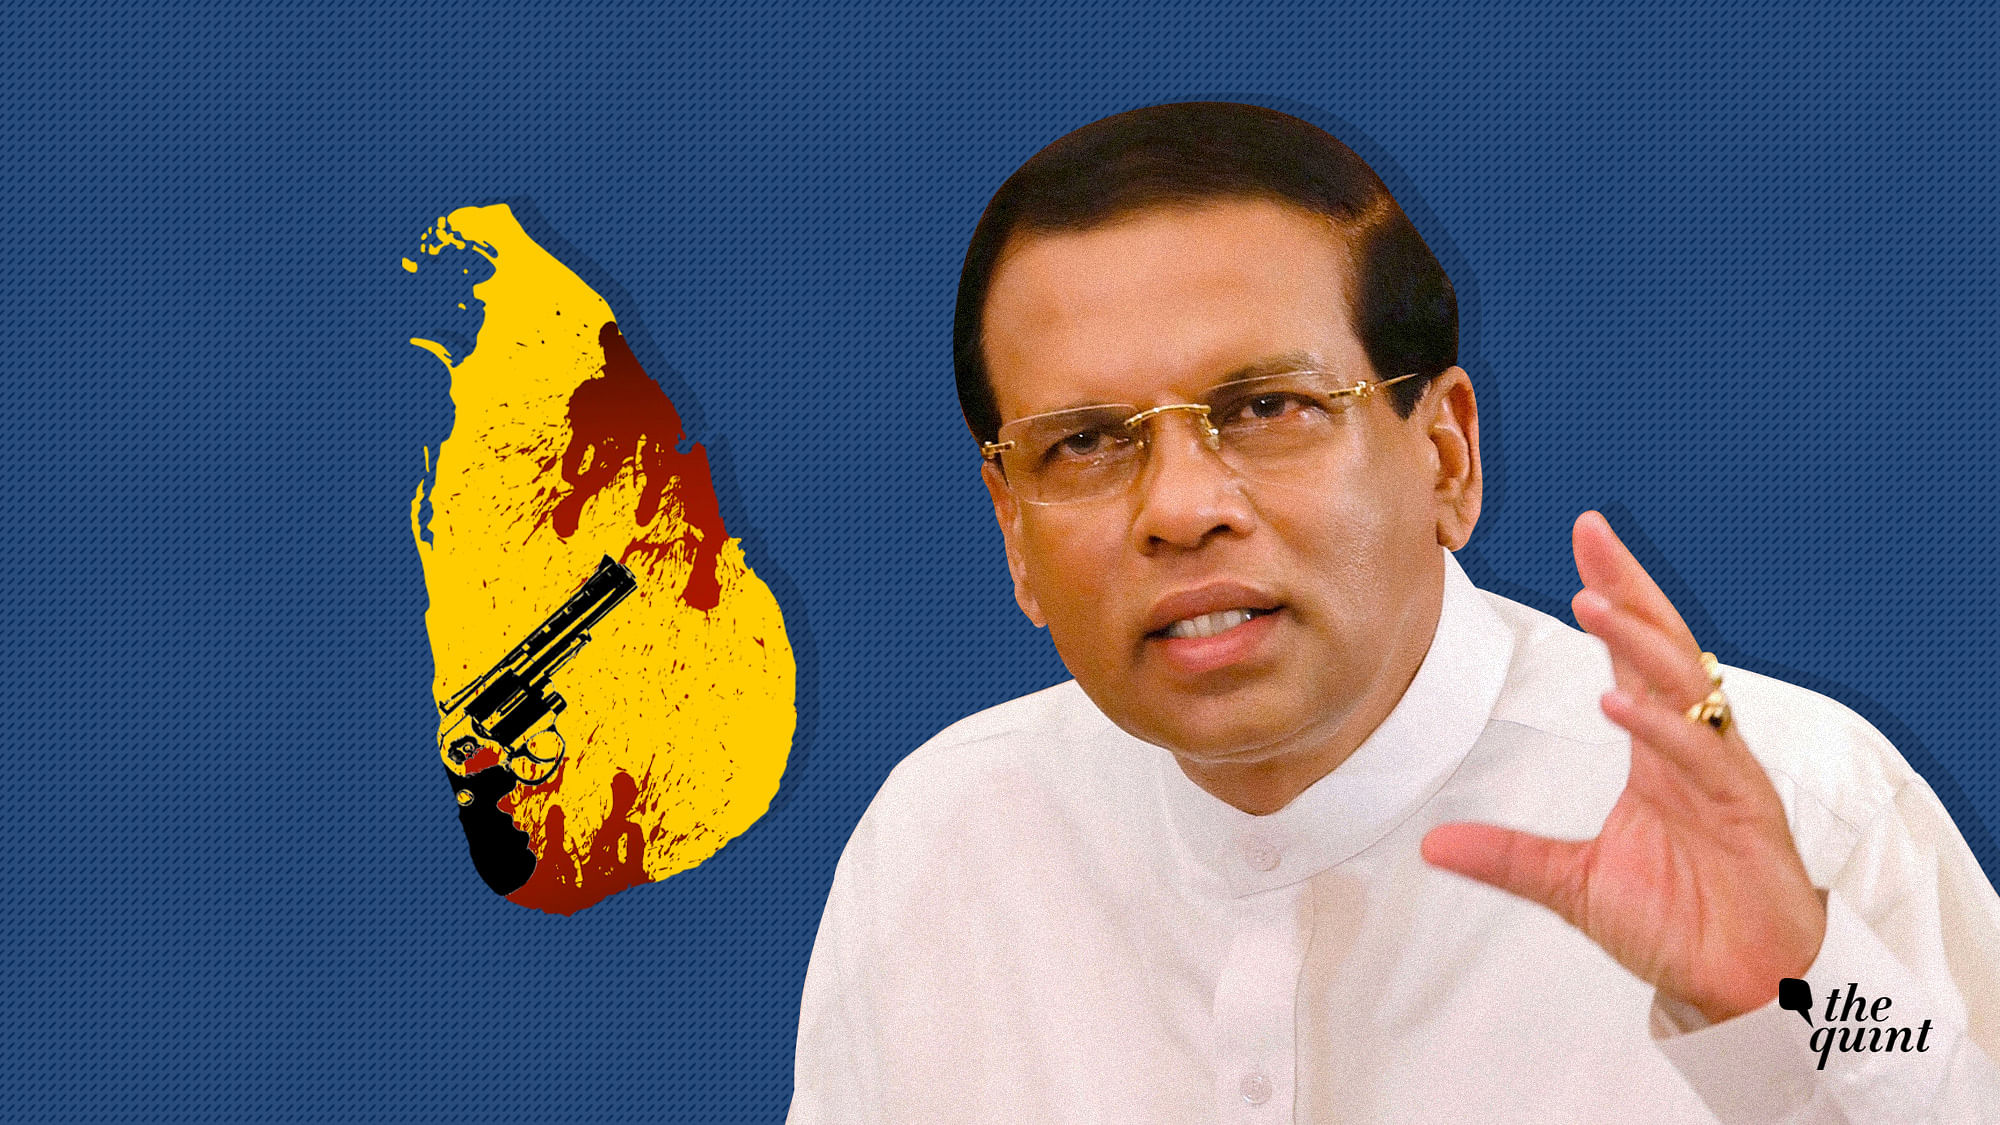 Sri Lankan President Maithripala Sirisena on Thursday said he was not privy to an intelligence warning on the Easter suicide bombings.